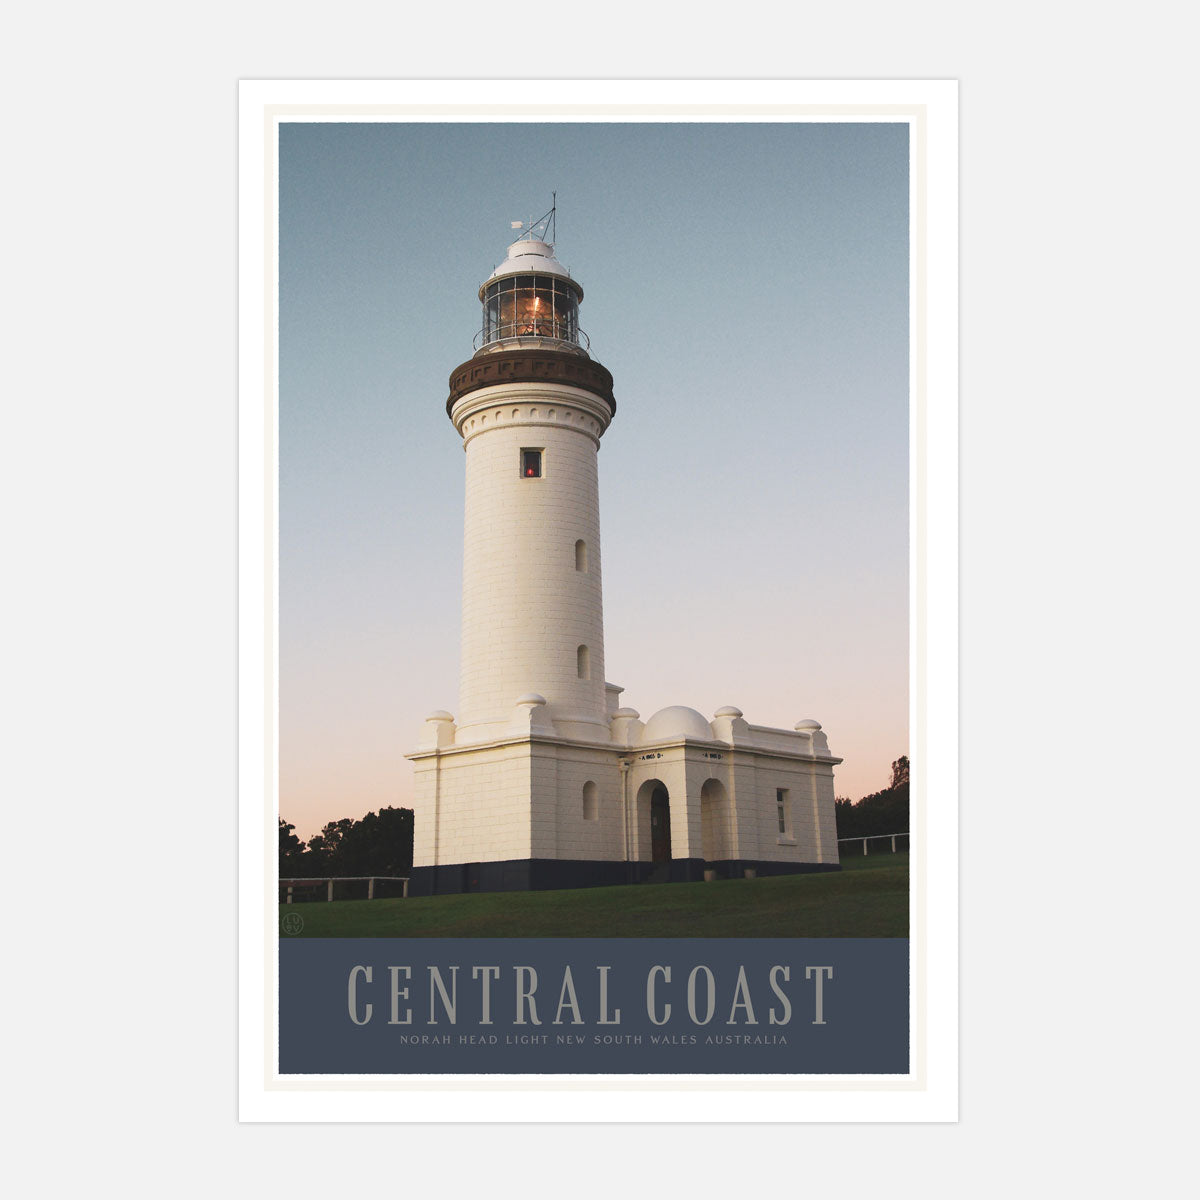 Norah Head Central Coast NSW retro vintage print from Places We Luv